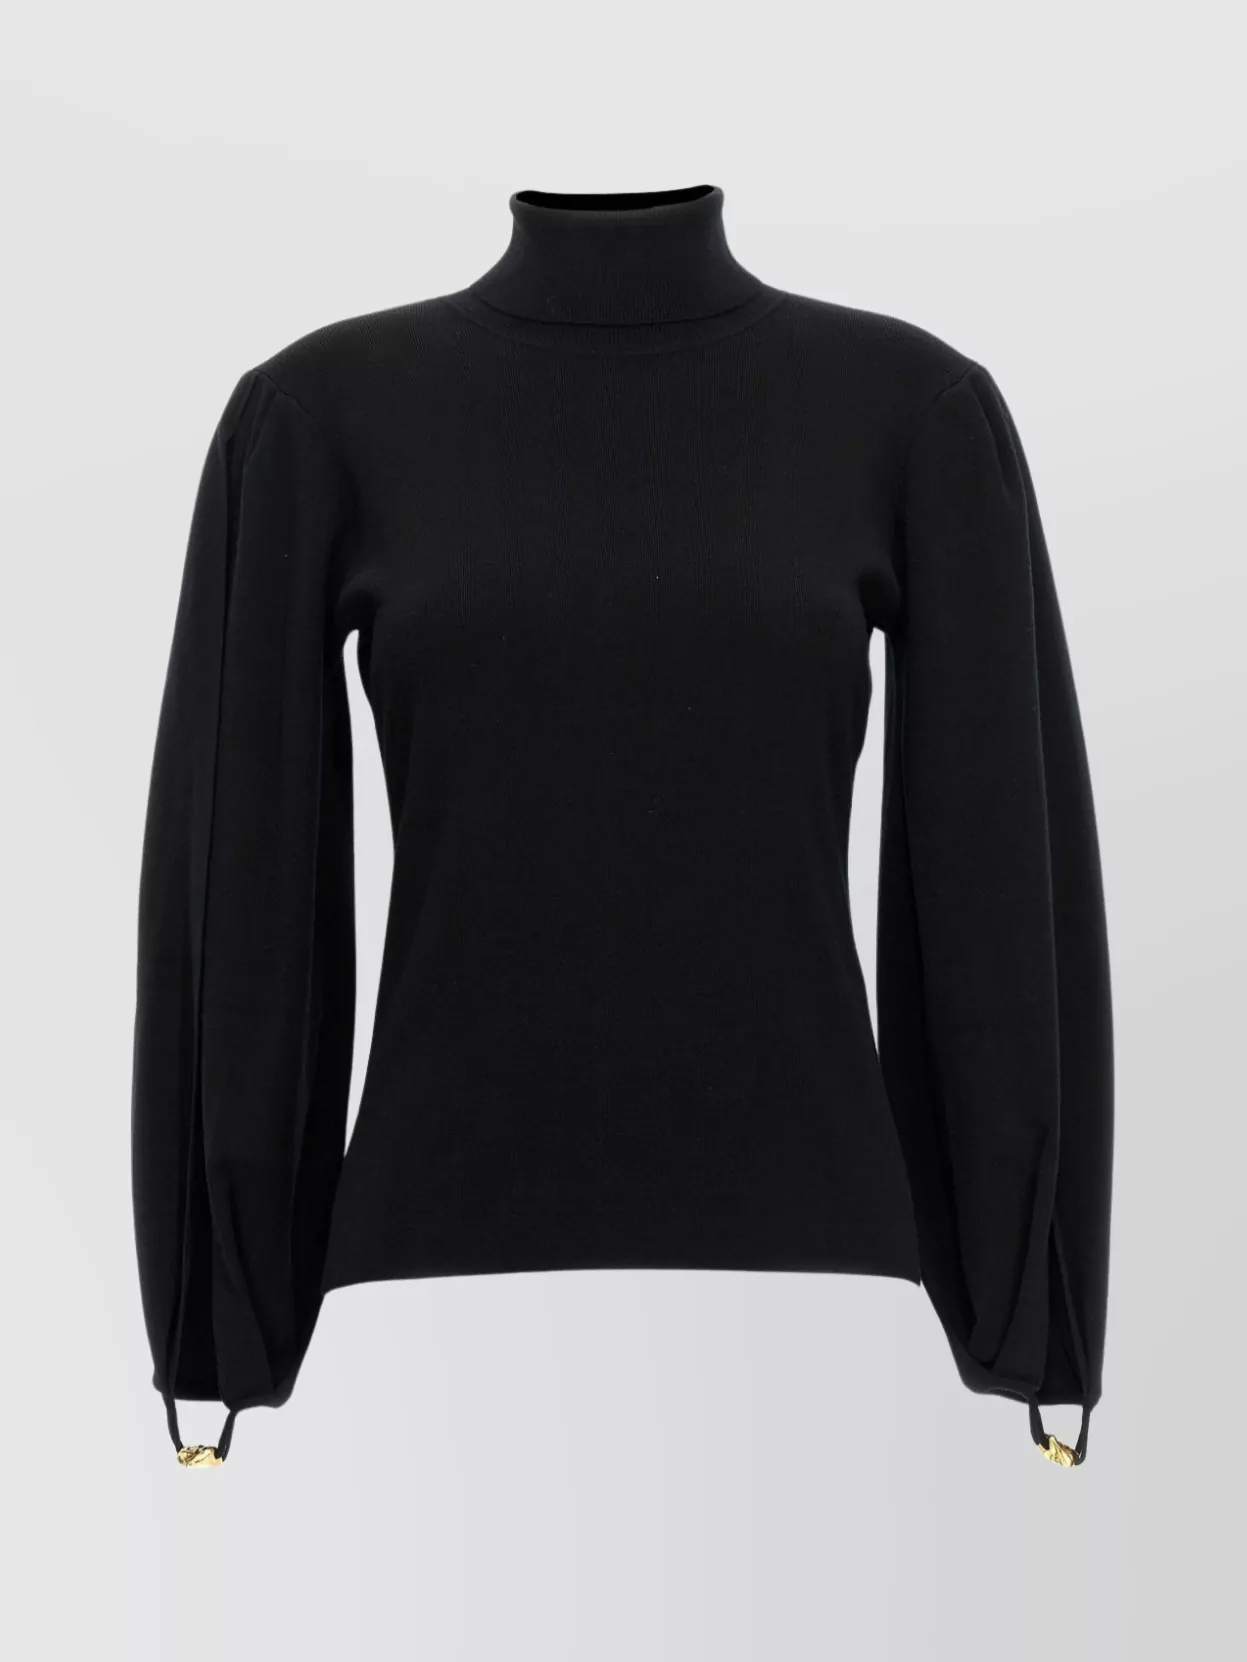 Chloé Sweater Slit Arms Gold Buttons In Black